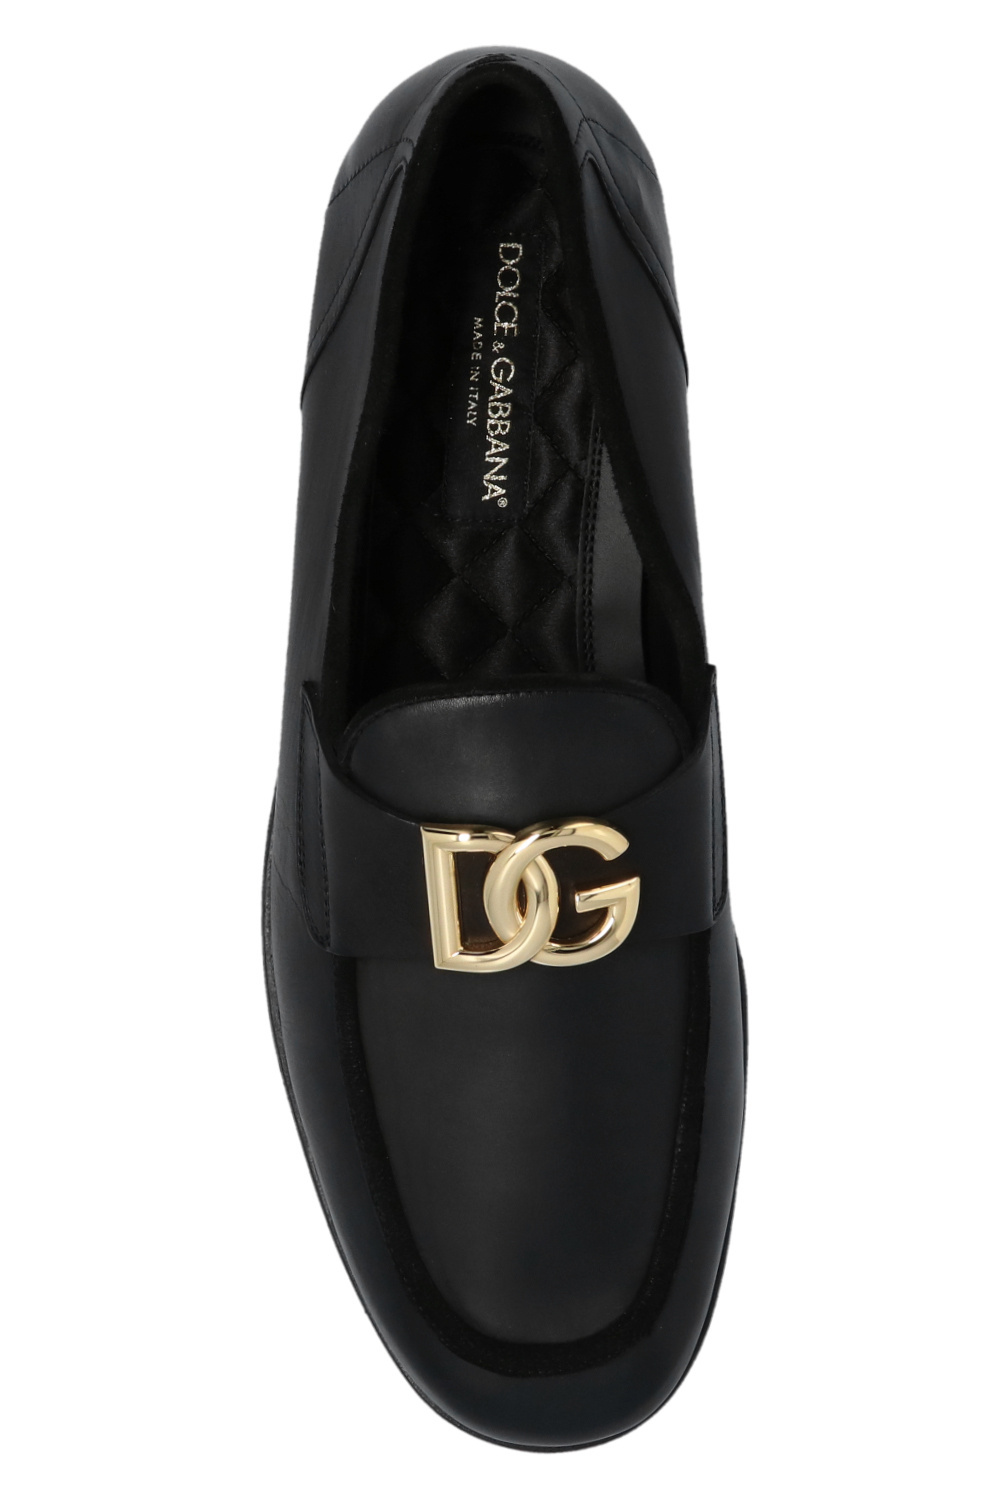 Dolce & Gabbana Leather loafers | Men's Shoes | Vitkac